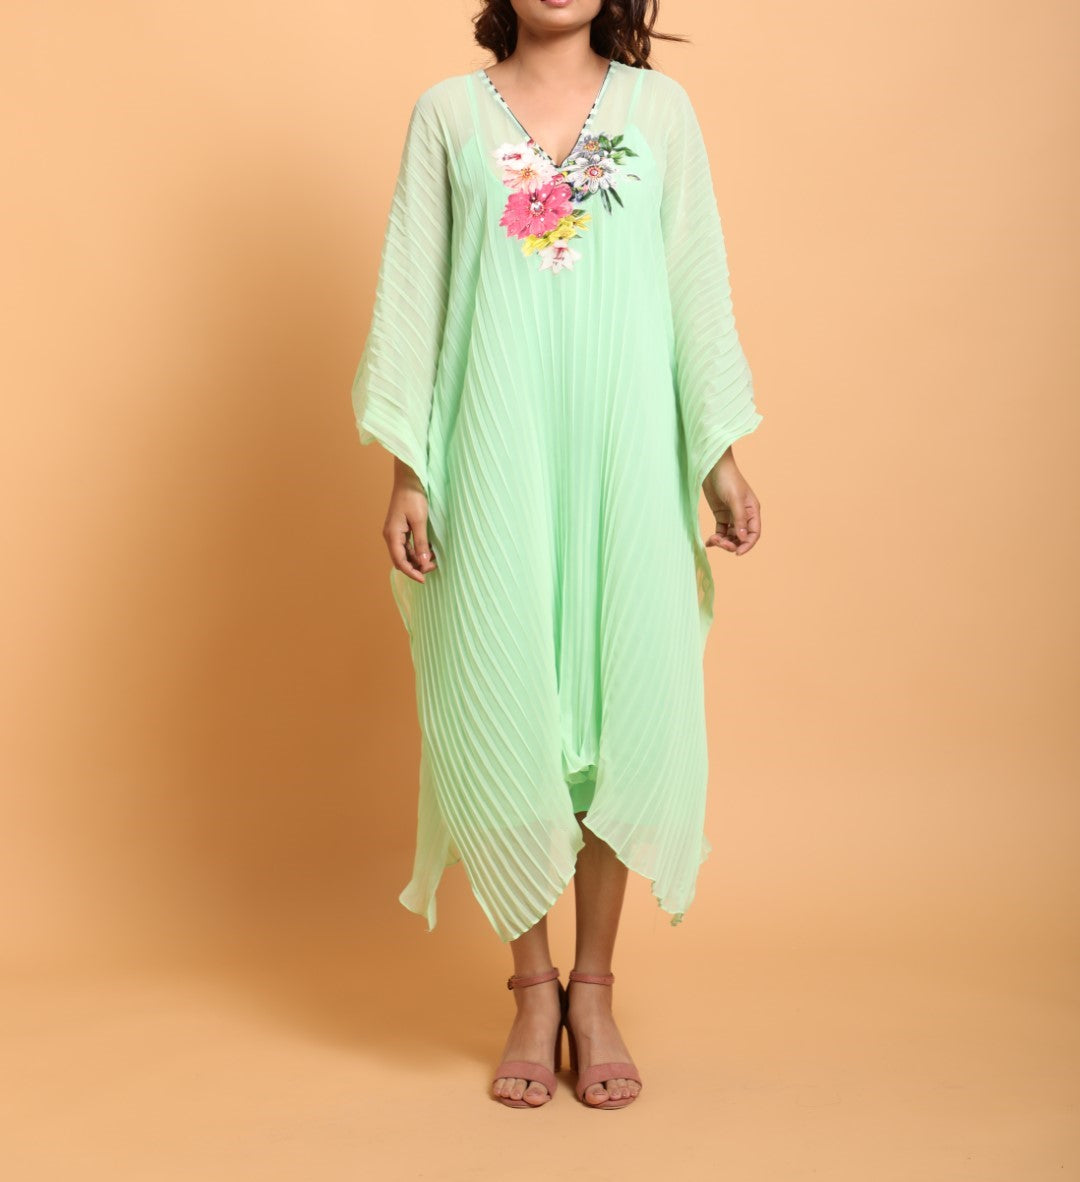 Pista Green pleated floral embroidered kaftan